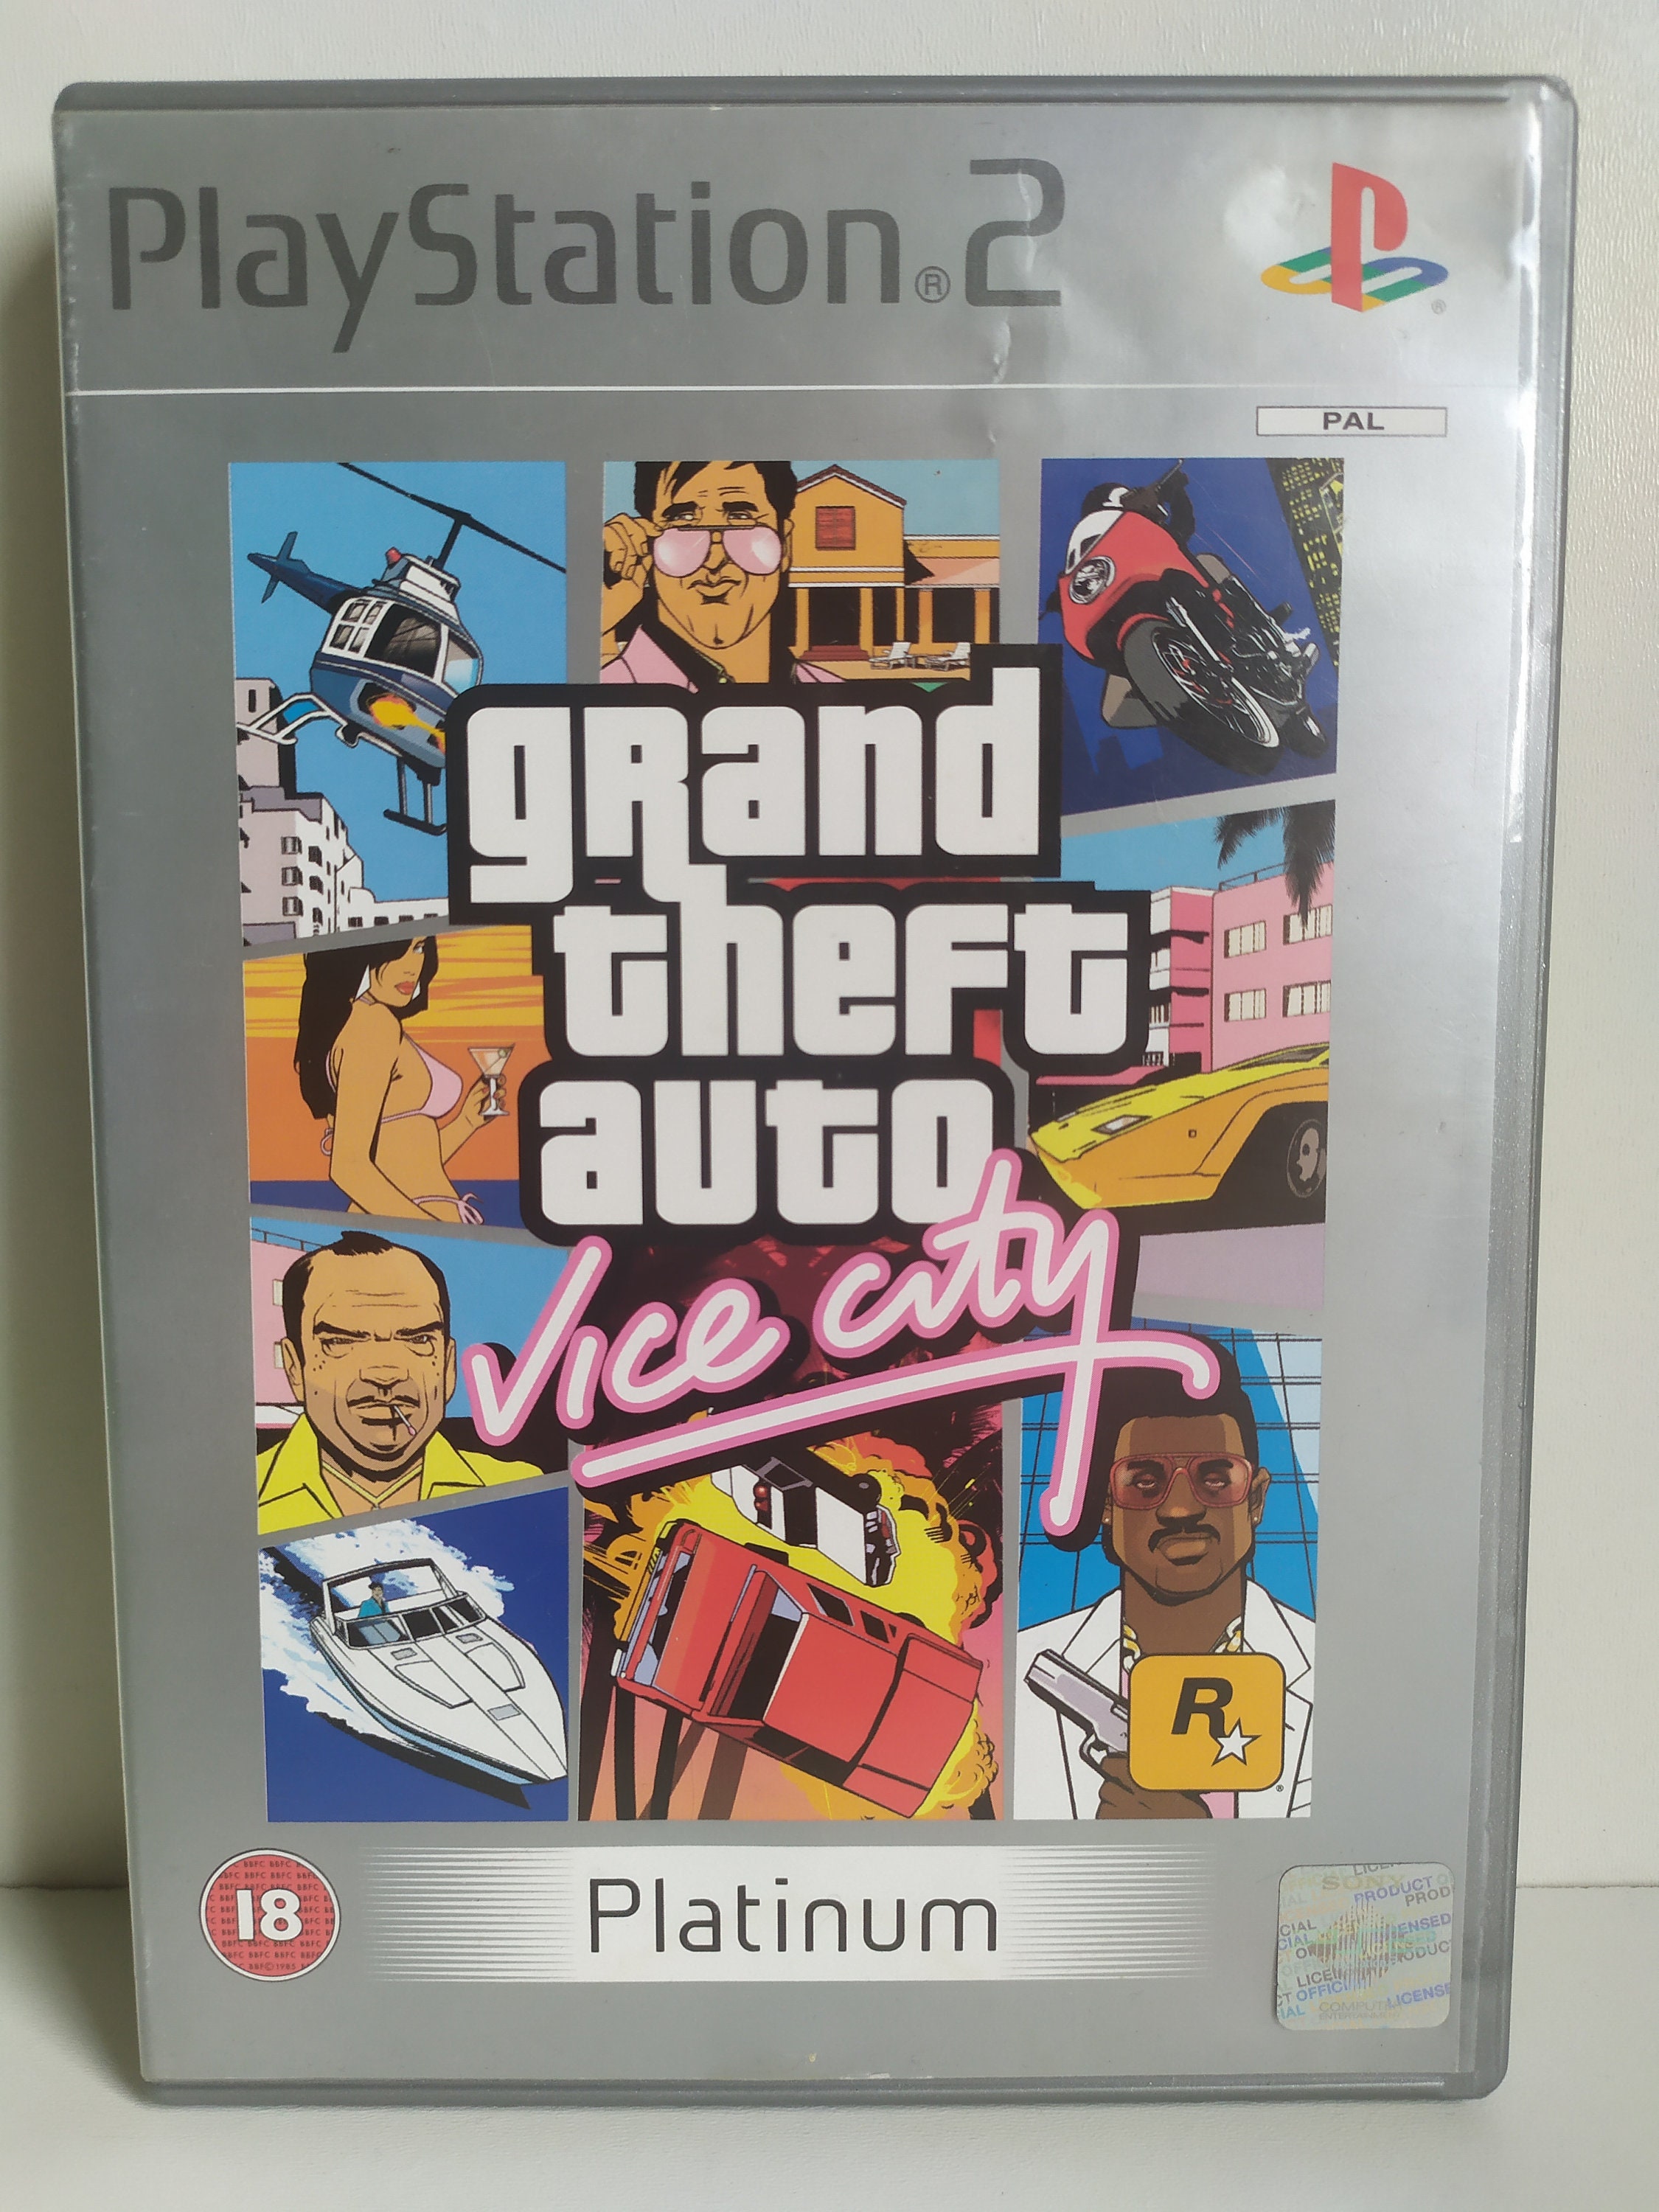 Gta Grand Theft Auto vice City Stories + Map sony PS2 PLAYSTATION 2 Slim 